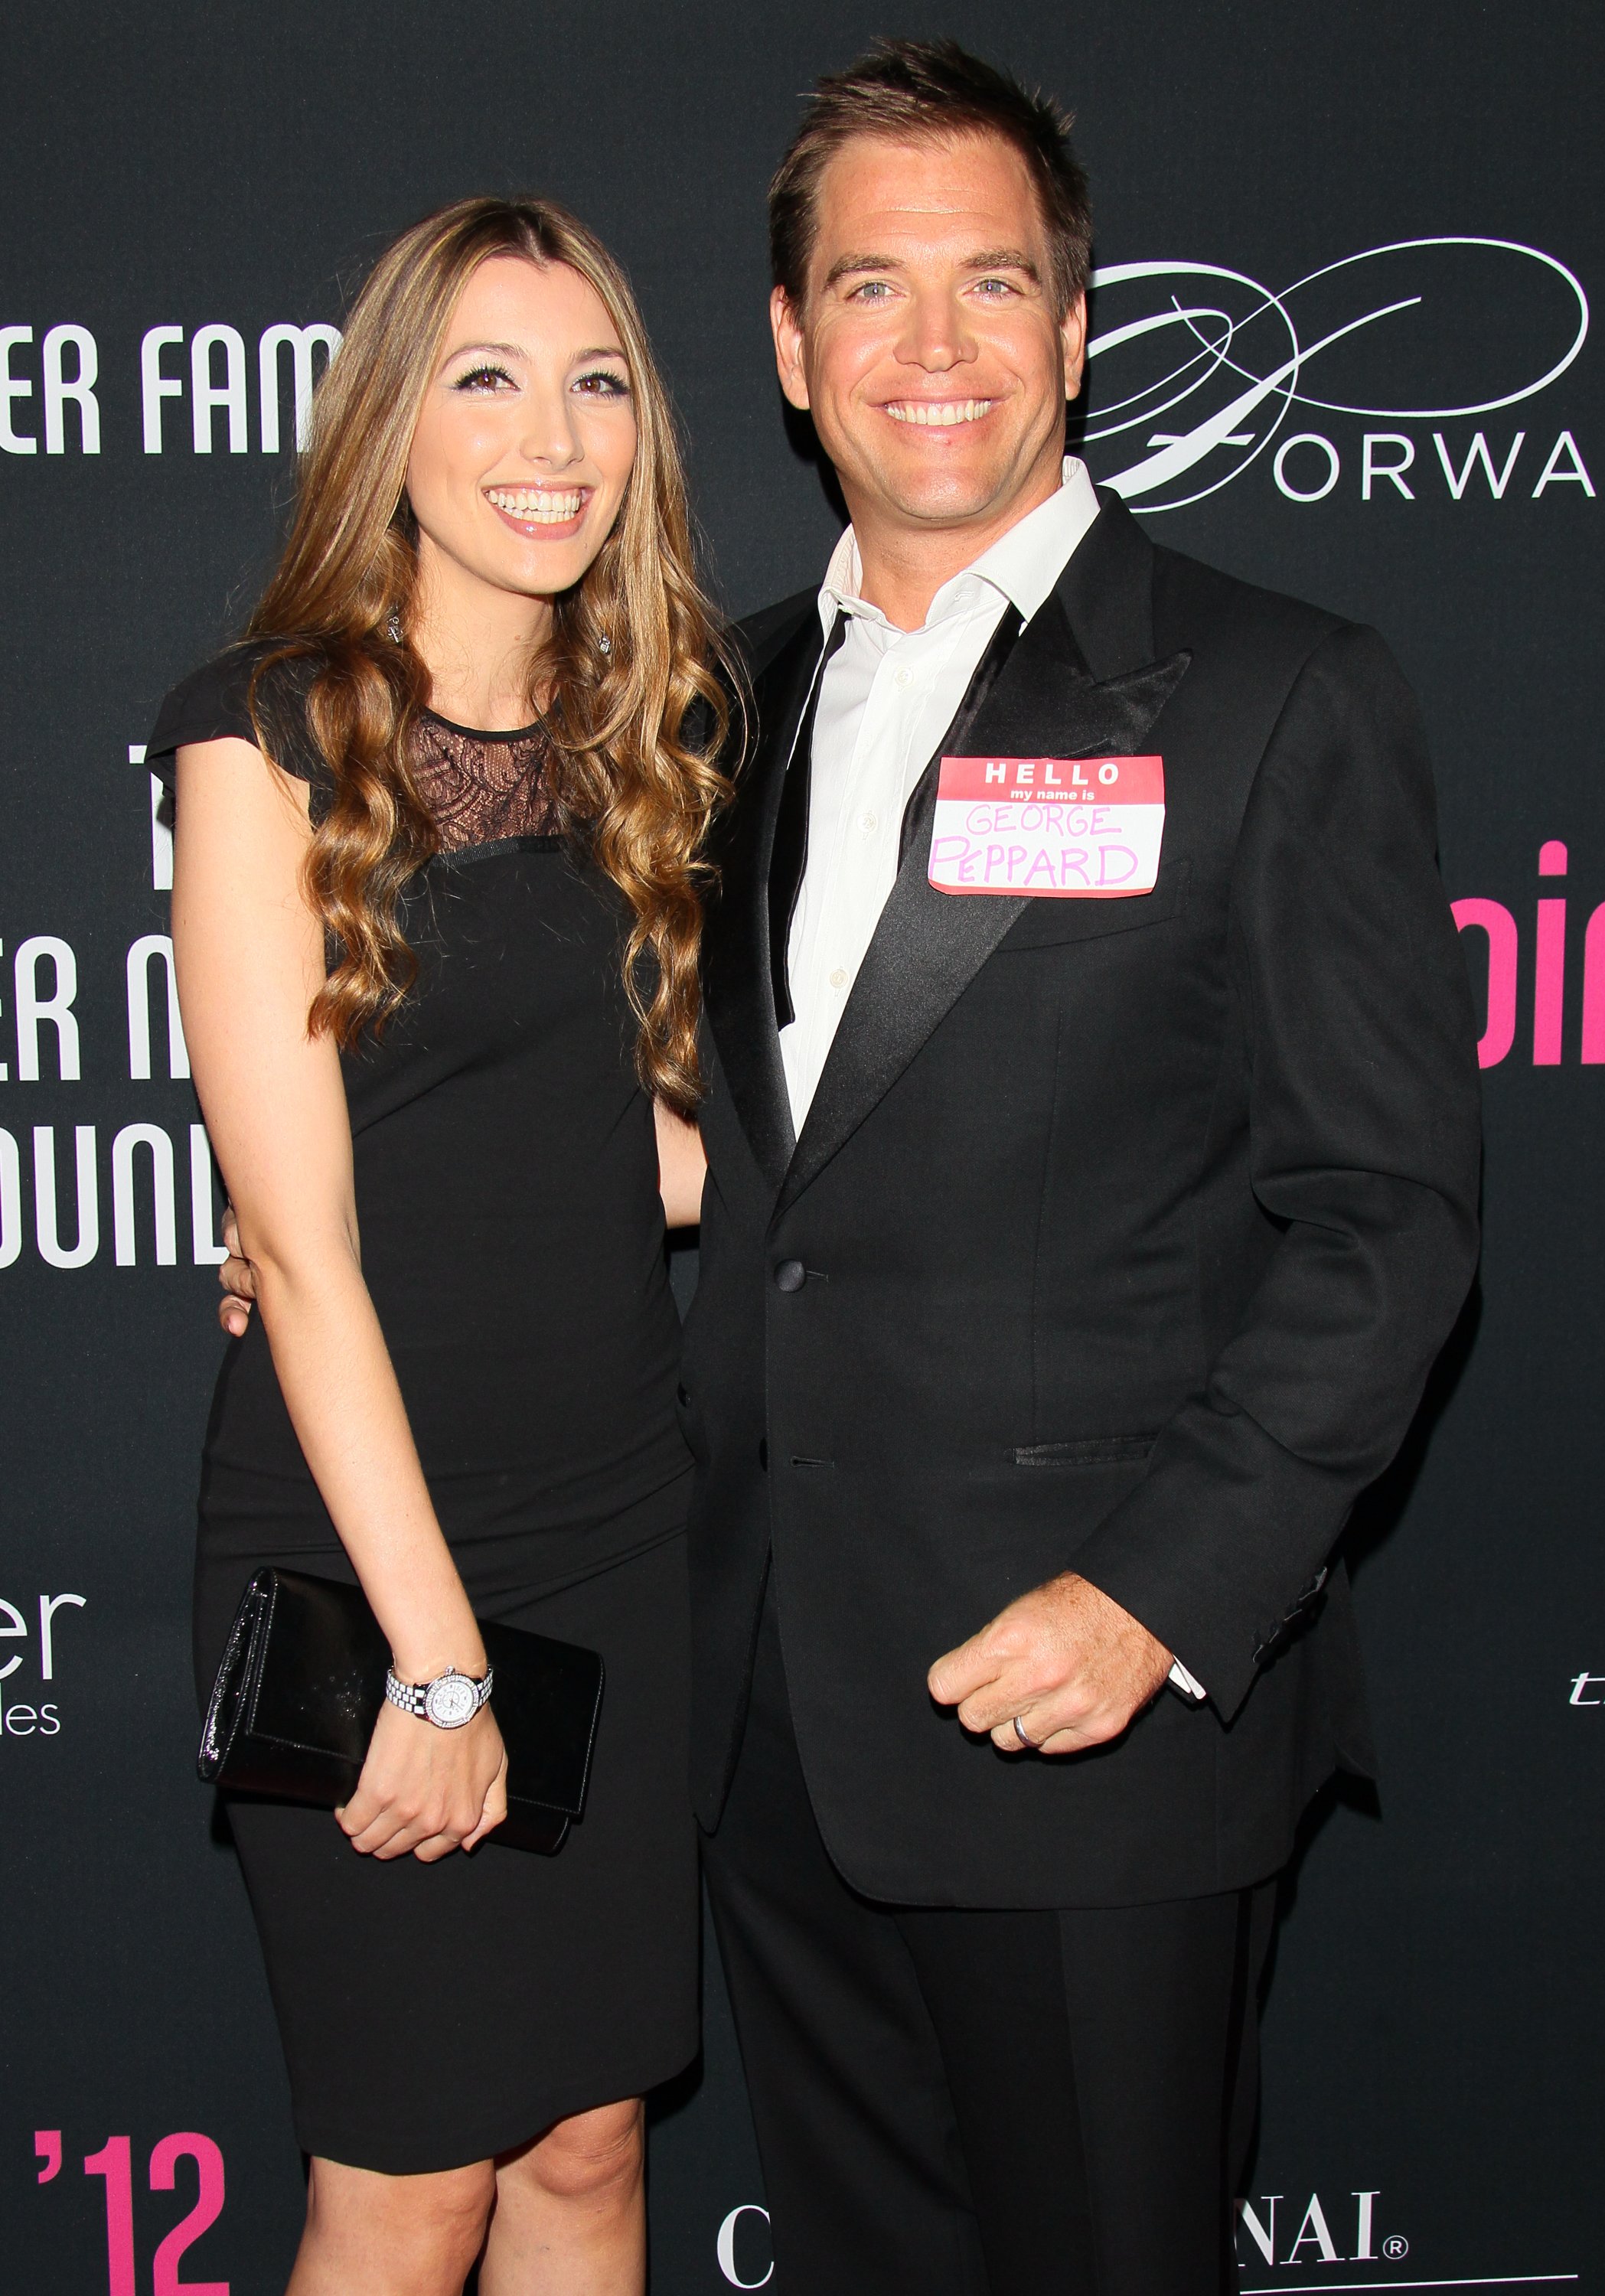 Michael Weatherly and Bojana Jankovic attend the 8th Annual Pink Party, October 27, 2012 in Santa Monica, California. | Source: Getty Images